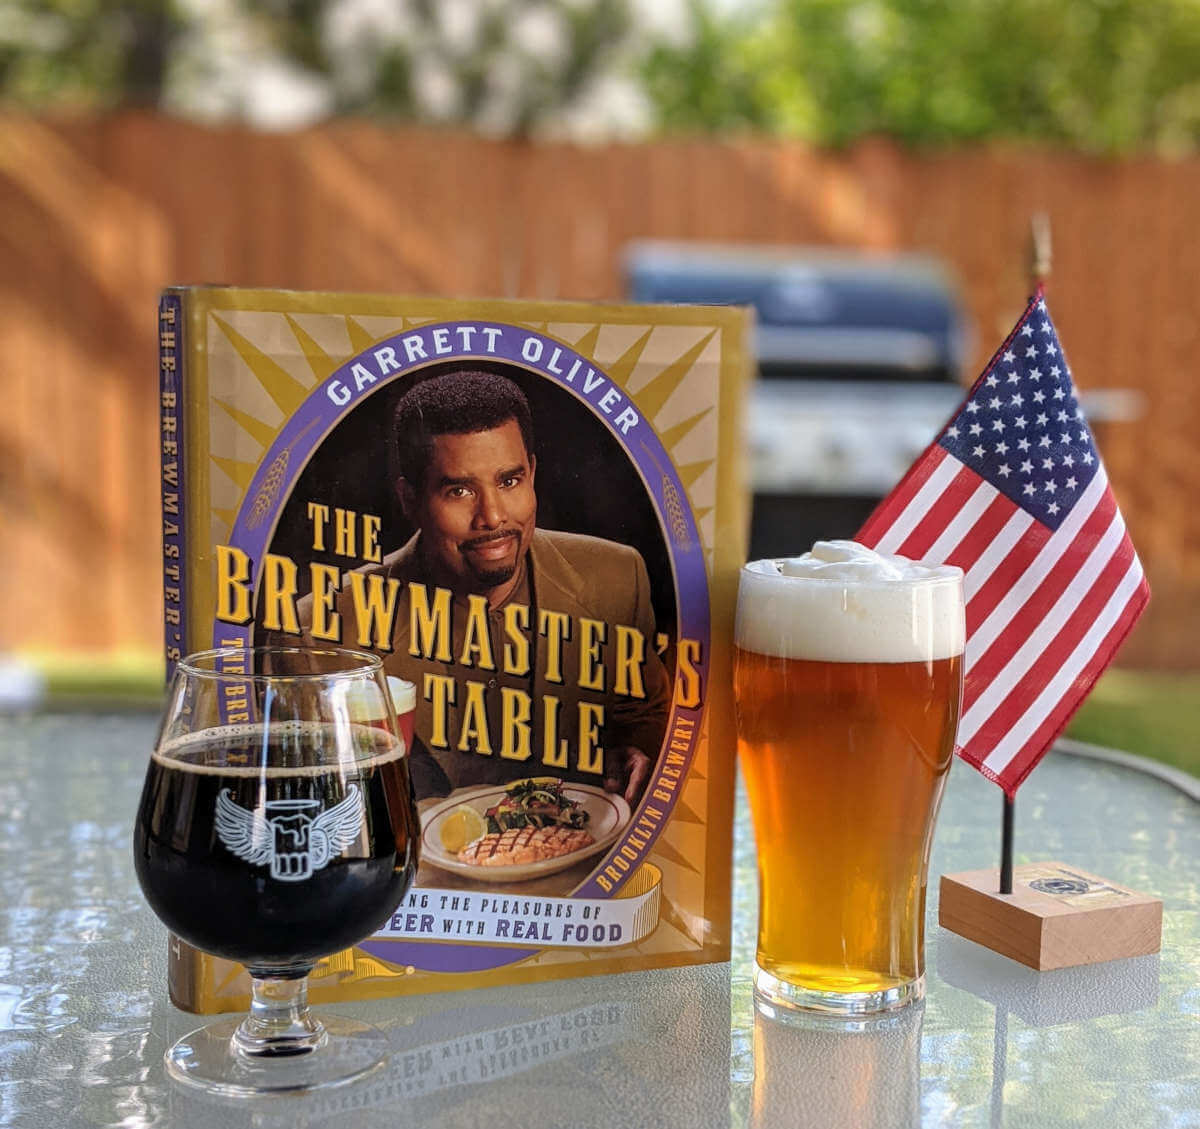 Latest print article: Beer suggestions to pair with your July 4th food